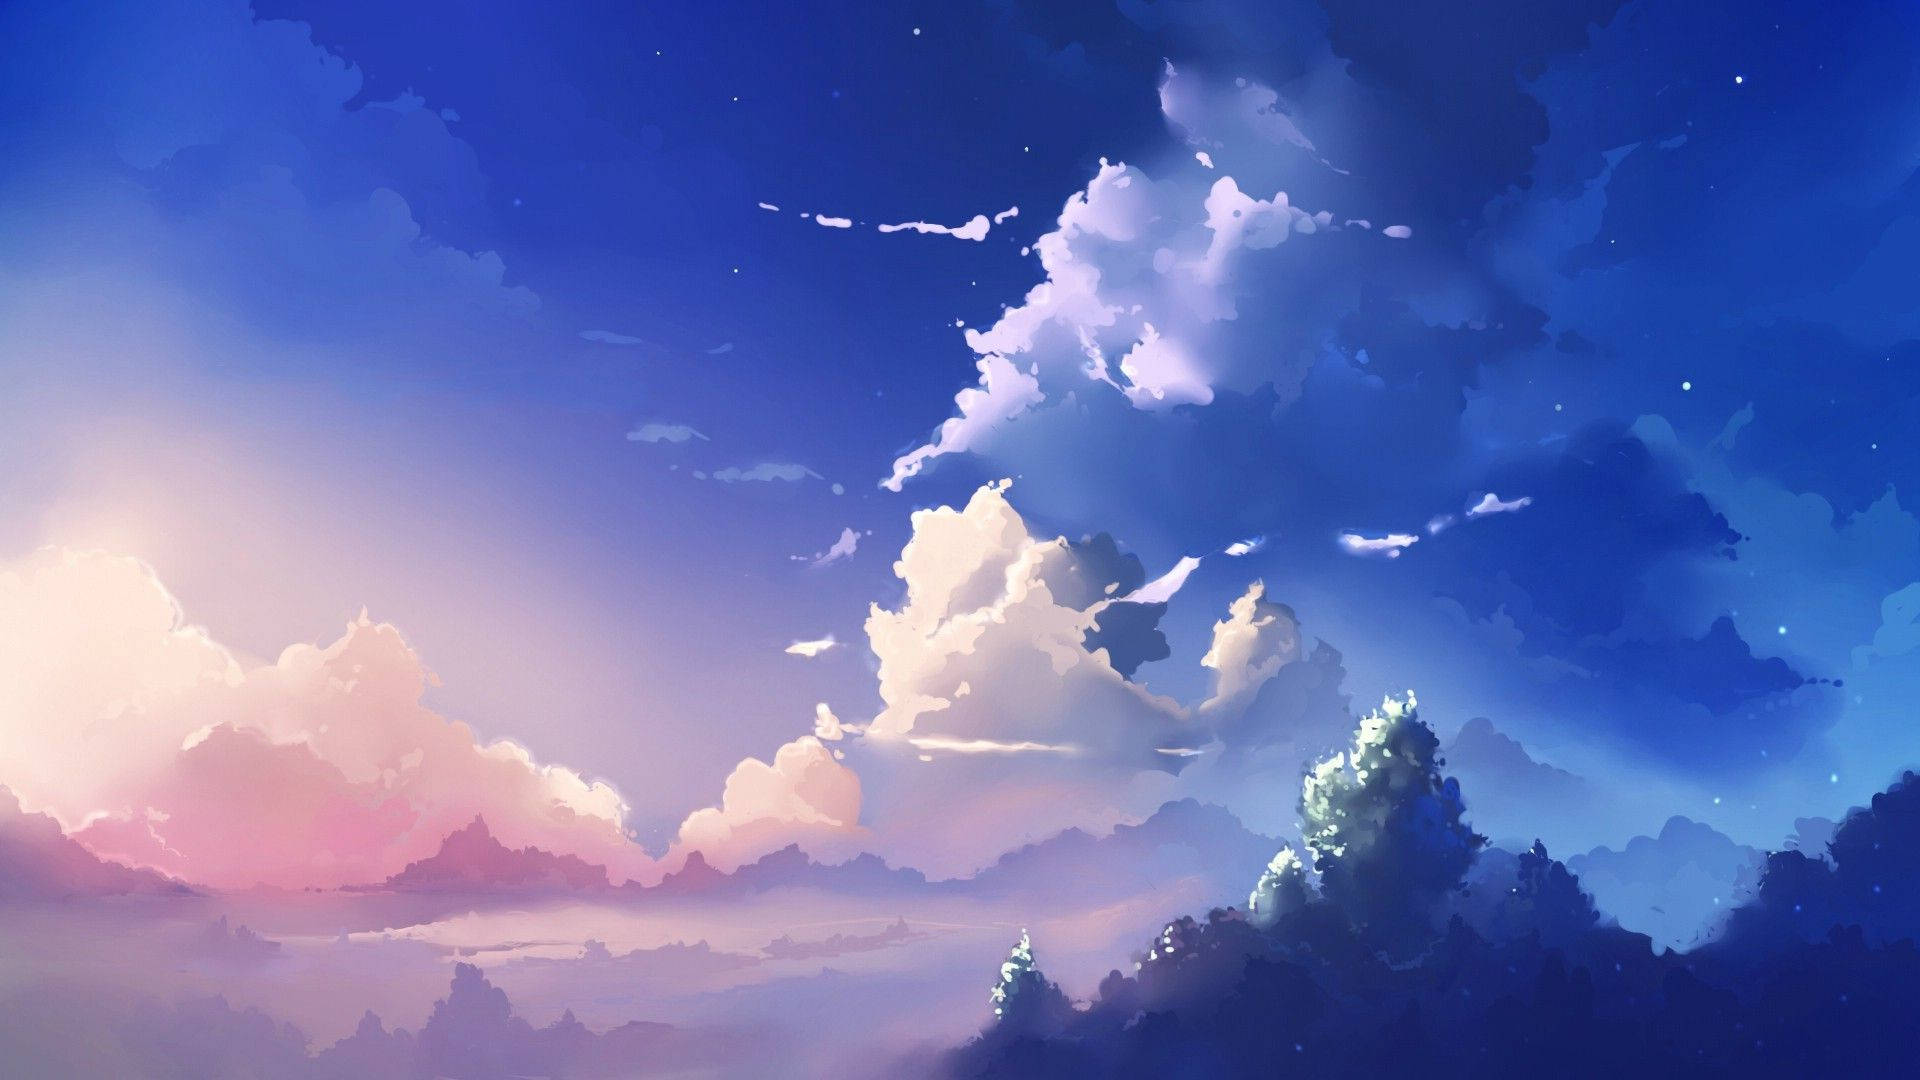 150 Anime Landscape HD Wallpapers and Backgrounds